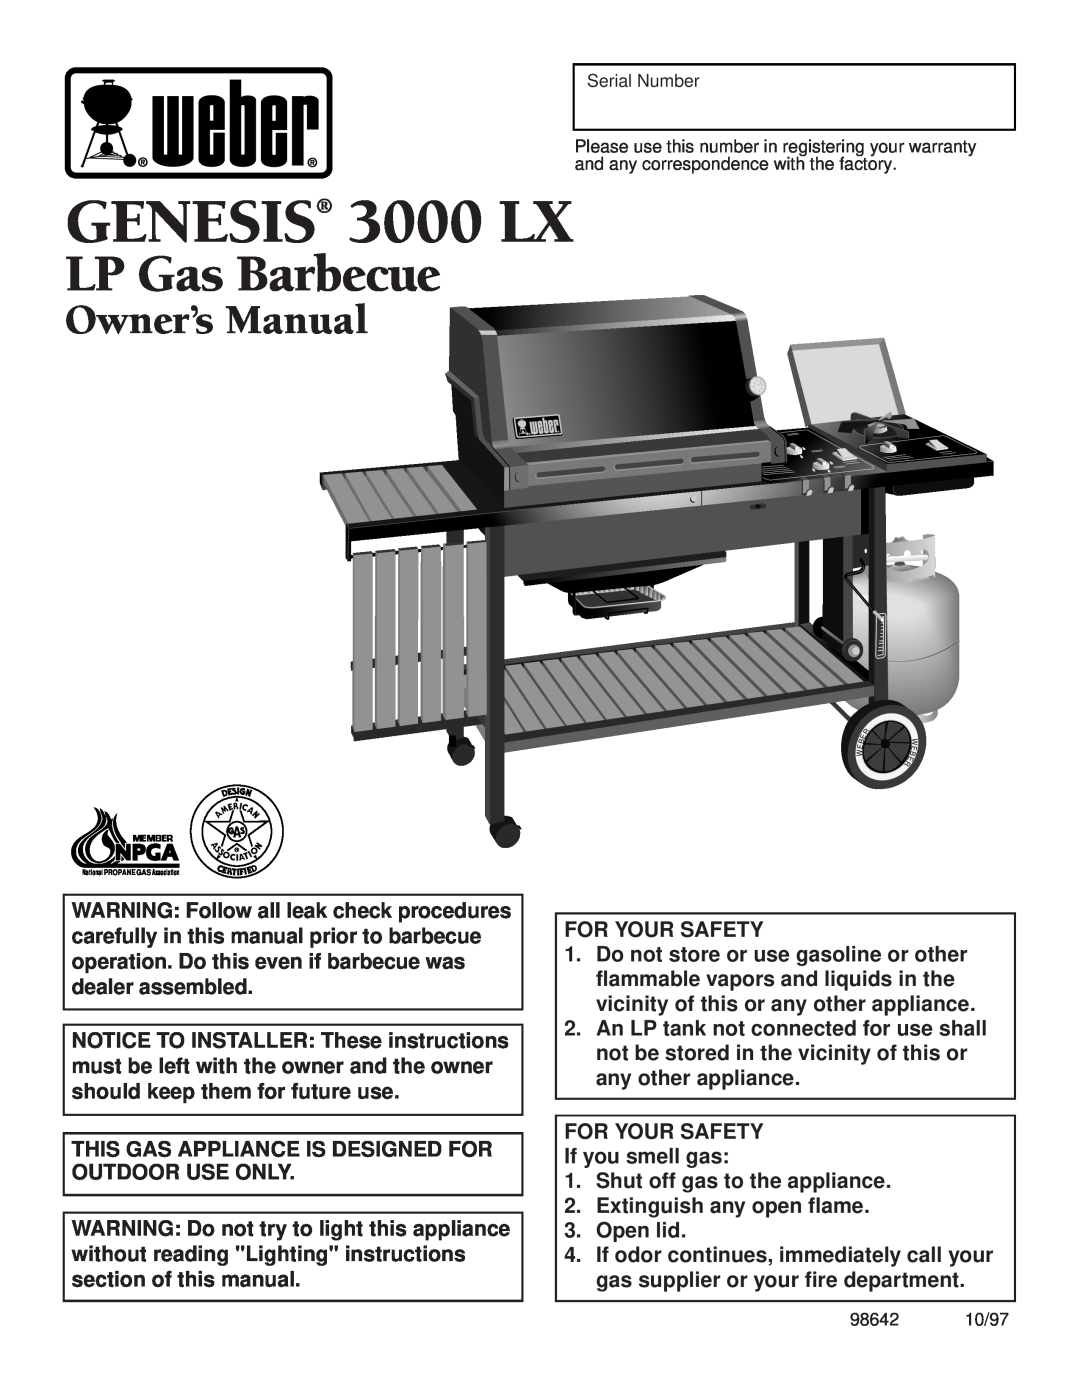 Weber owner manual LP Gas Barbecue, GENESIS 3000 LX, For Your Safety, FOR YOUR SAFETY If you smell gas 